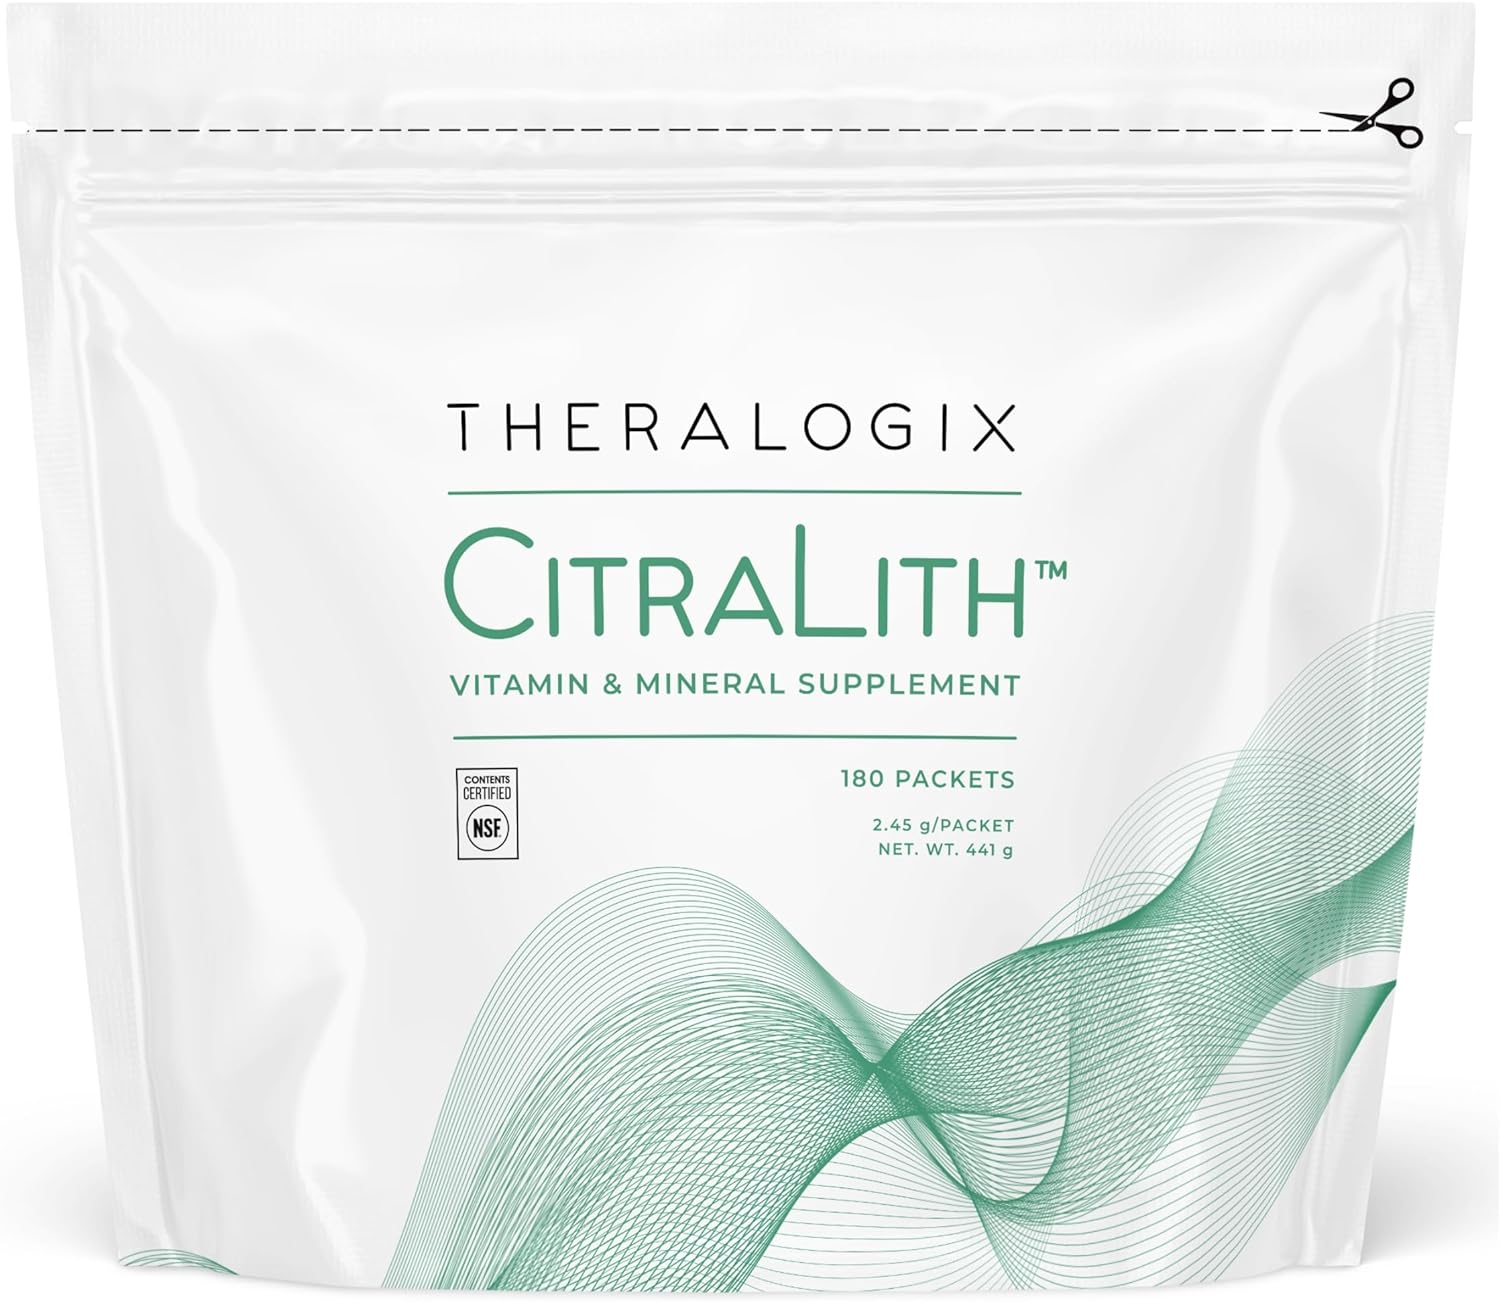 Theralogix CitraLith Vitamin & Mineral Supplement - 90-Day Supply - Kidney Health Supplement - Supports Healthy Kidney Function - Includes Magnesium, Sodium & Potassium - NSF Certified - 180 Packets